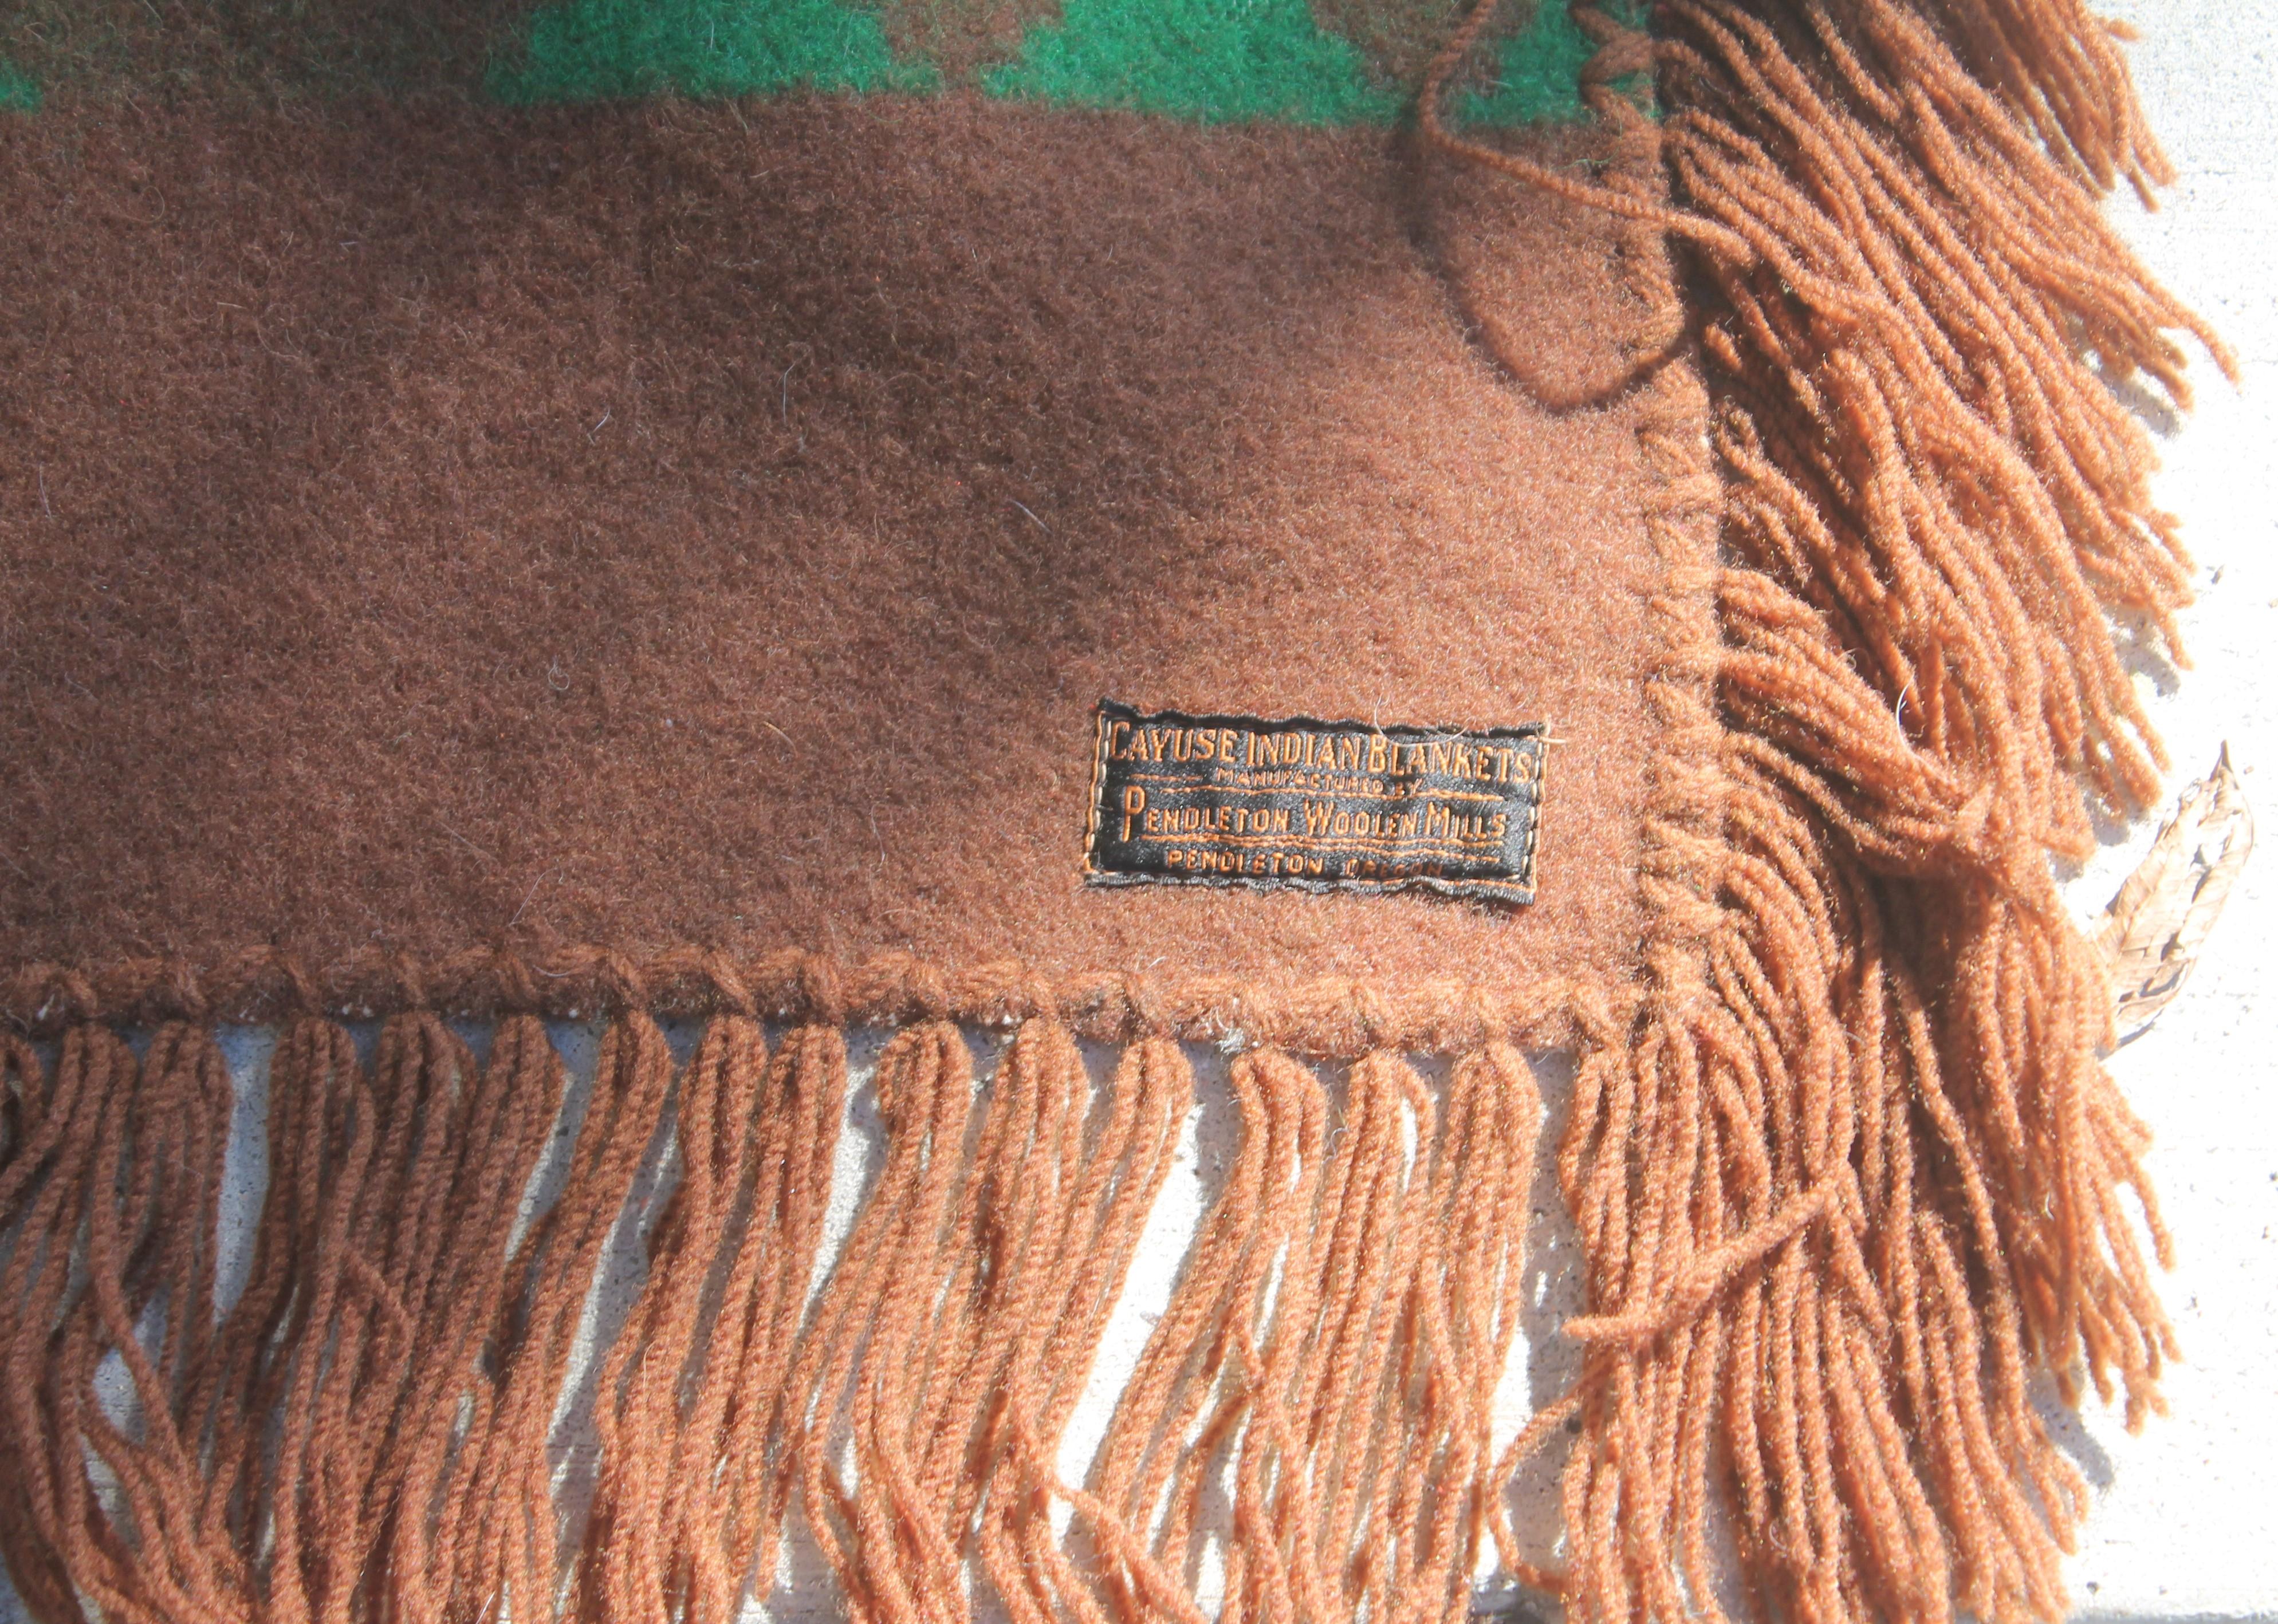 This early Pendleton black label Cayuse blanket with original fringe and label is in pristine condition. Such unusual colors and pattern on this blanket.